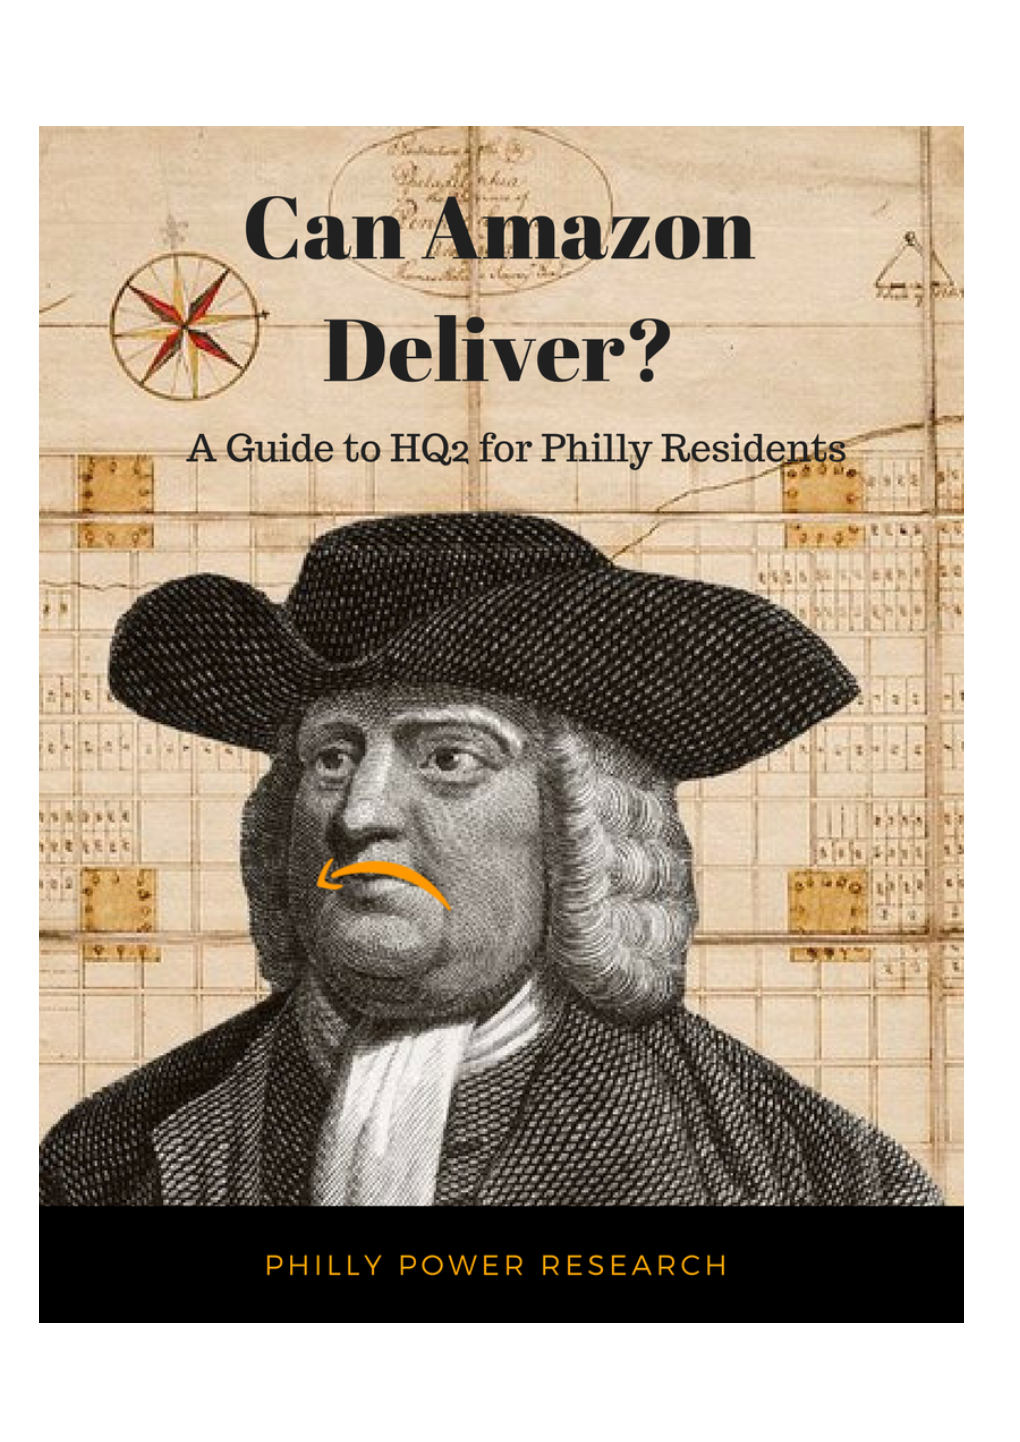 Can Amazon Deliver? a Guide to HQ2 for Philly Residents Researched and Compiled by Philly Power Research March 2018 ____